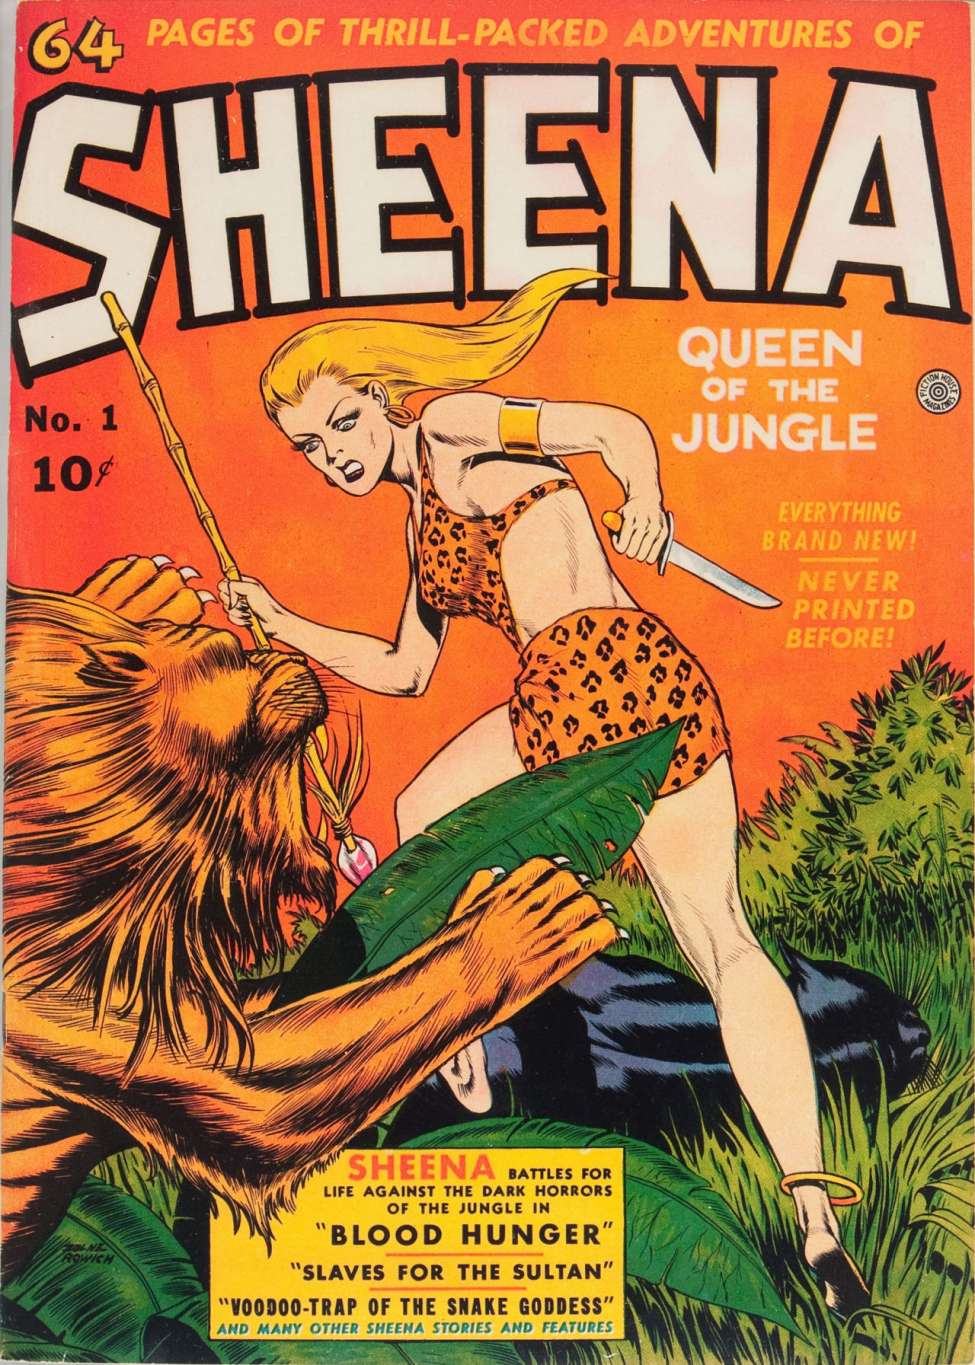 Book Cover For Sheena, Queen of the Jungle 1